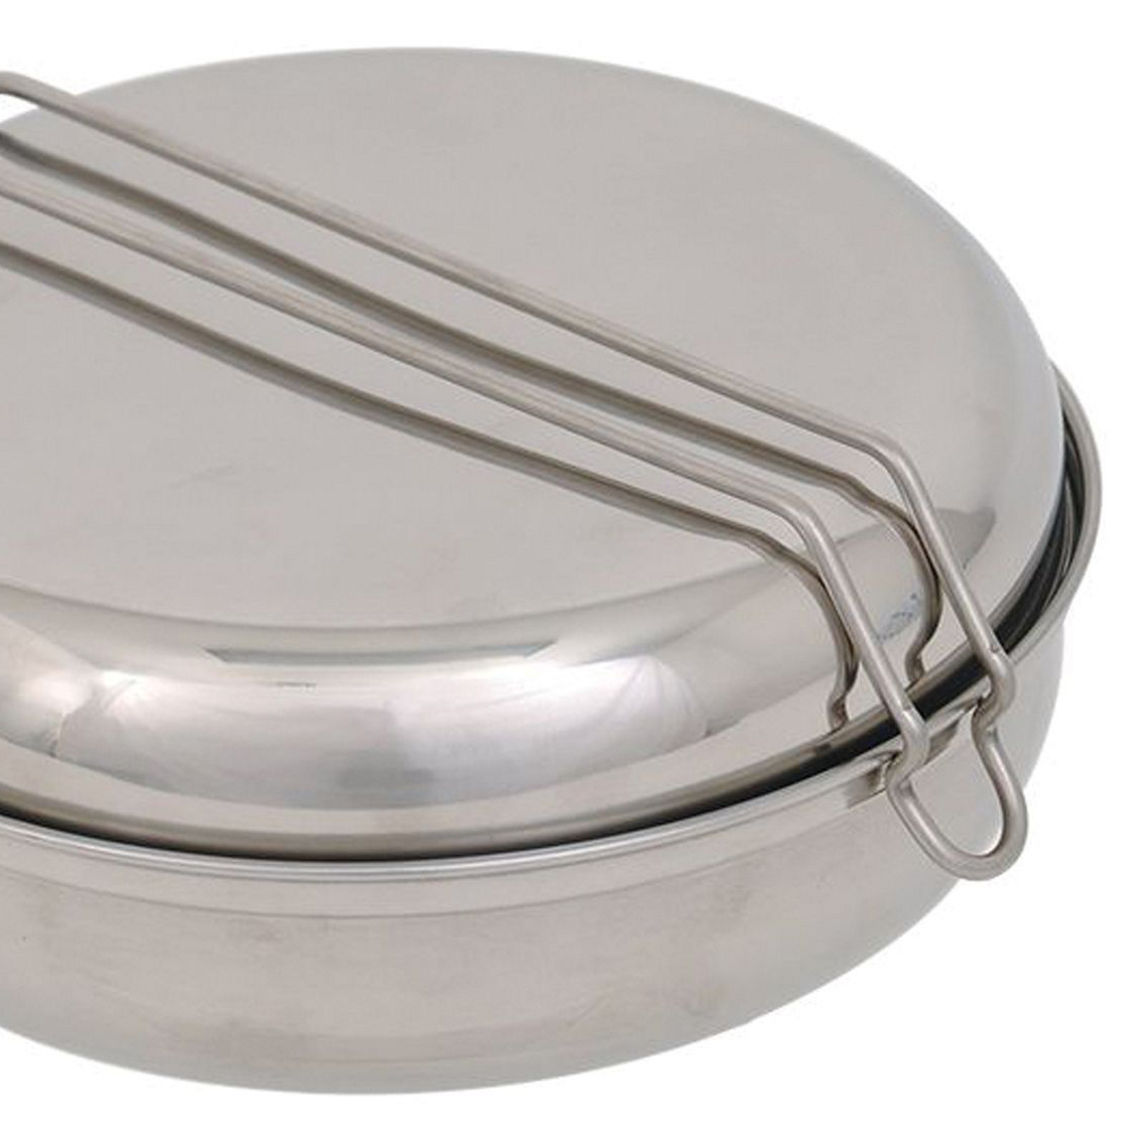 OLICAMP DELUXE MESS KIT - Image 2 of 4